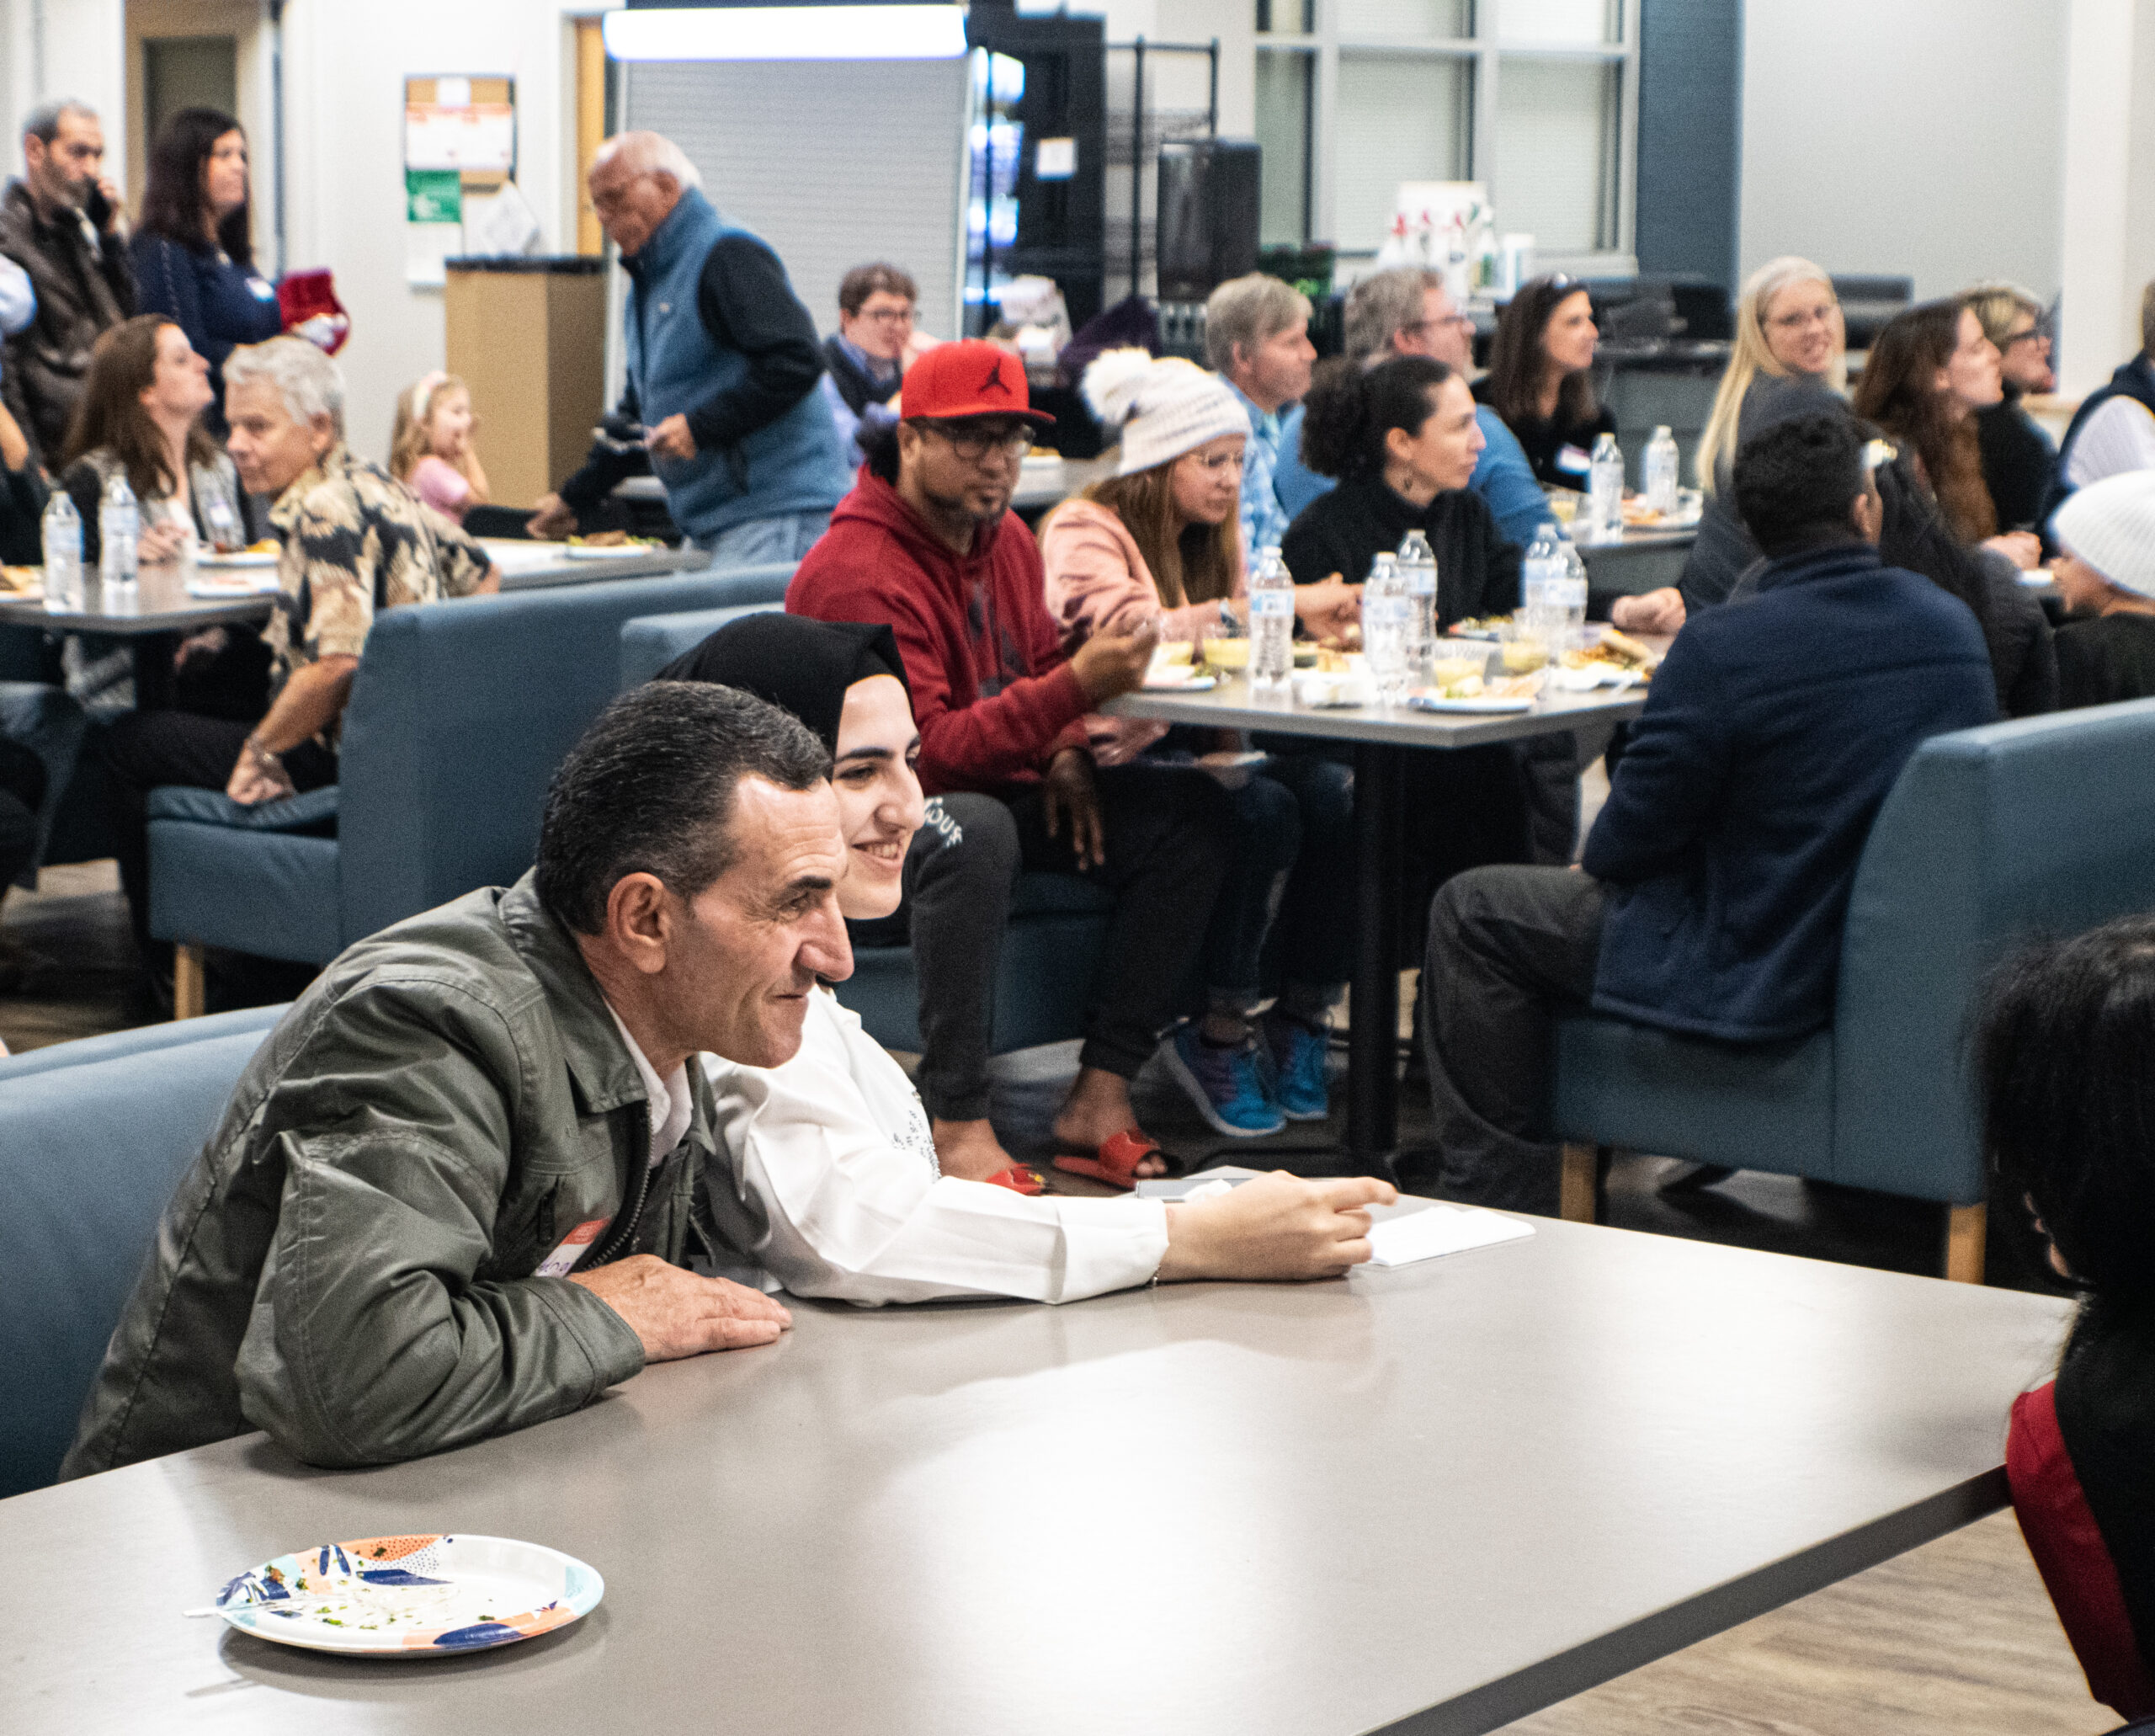 Father and Daughter adult learners sit at a table during a community dinner celebrating Syrian culture.